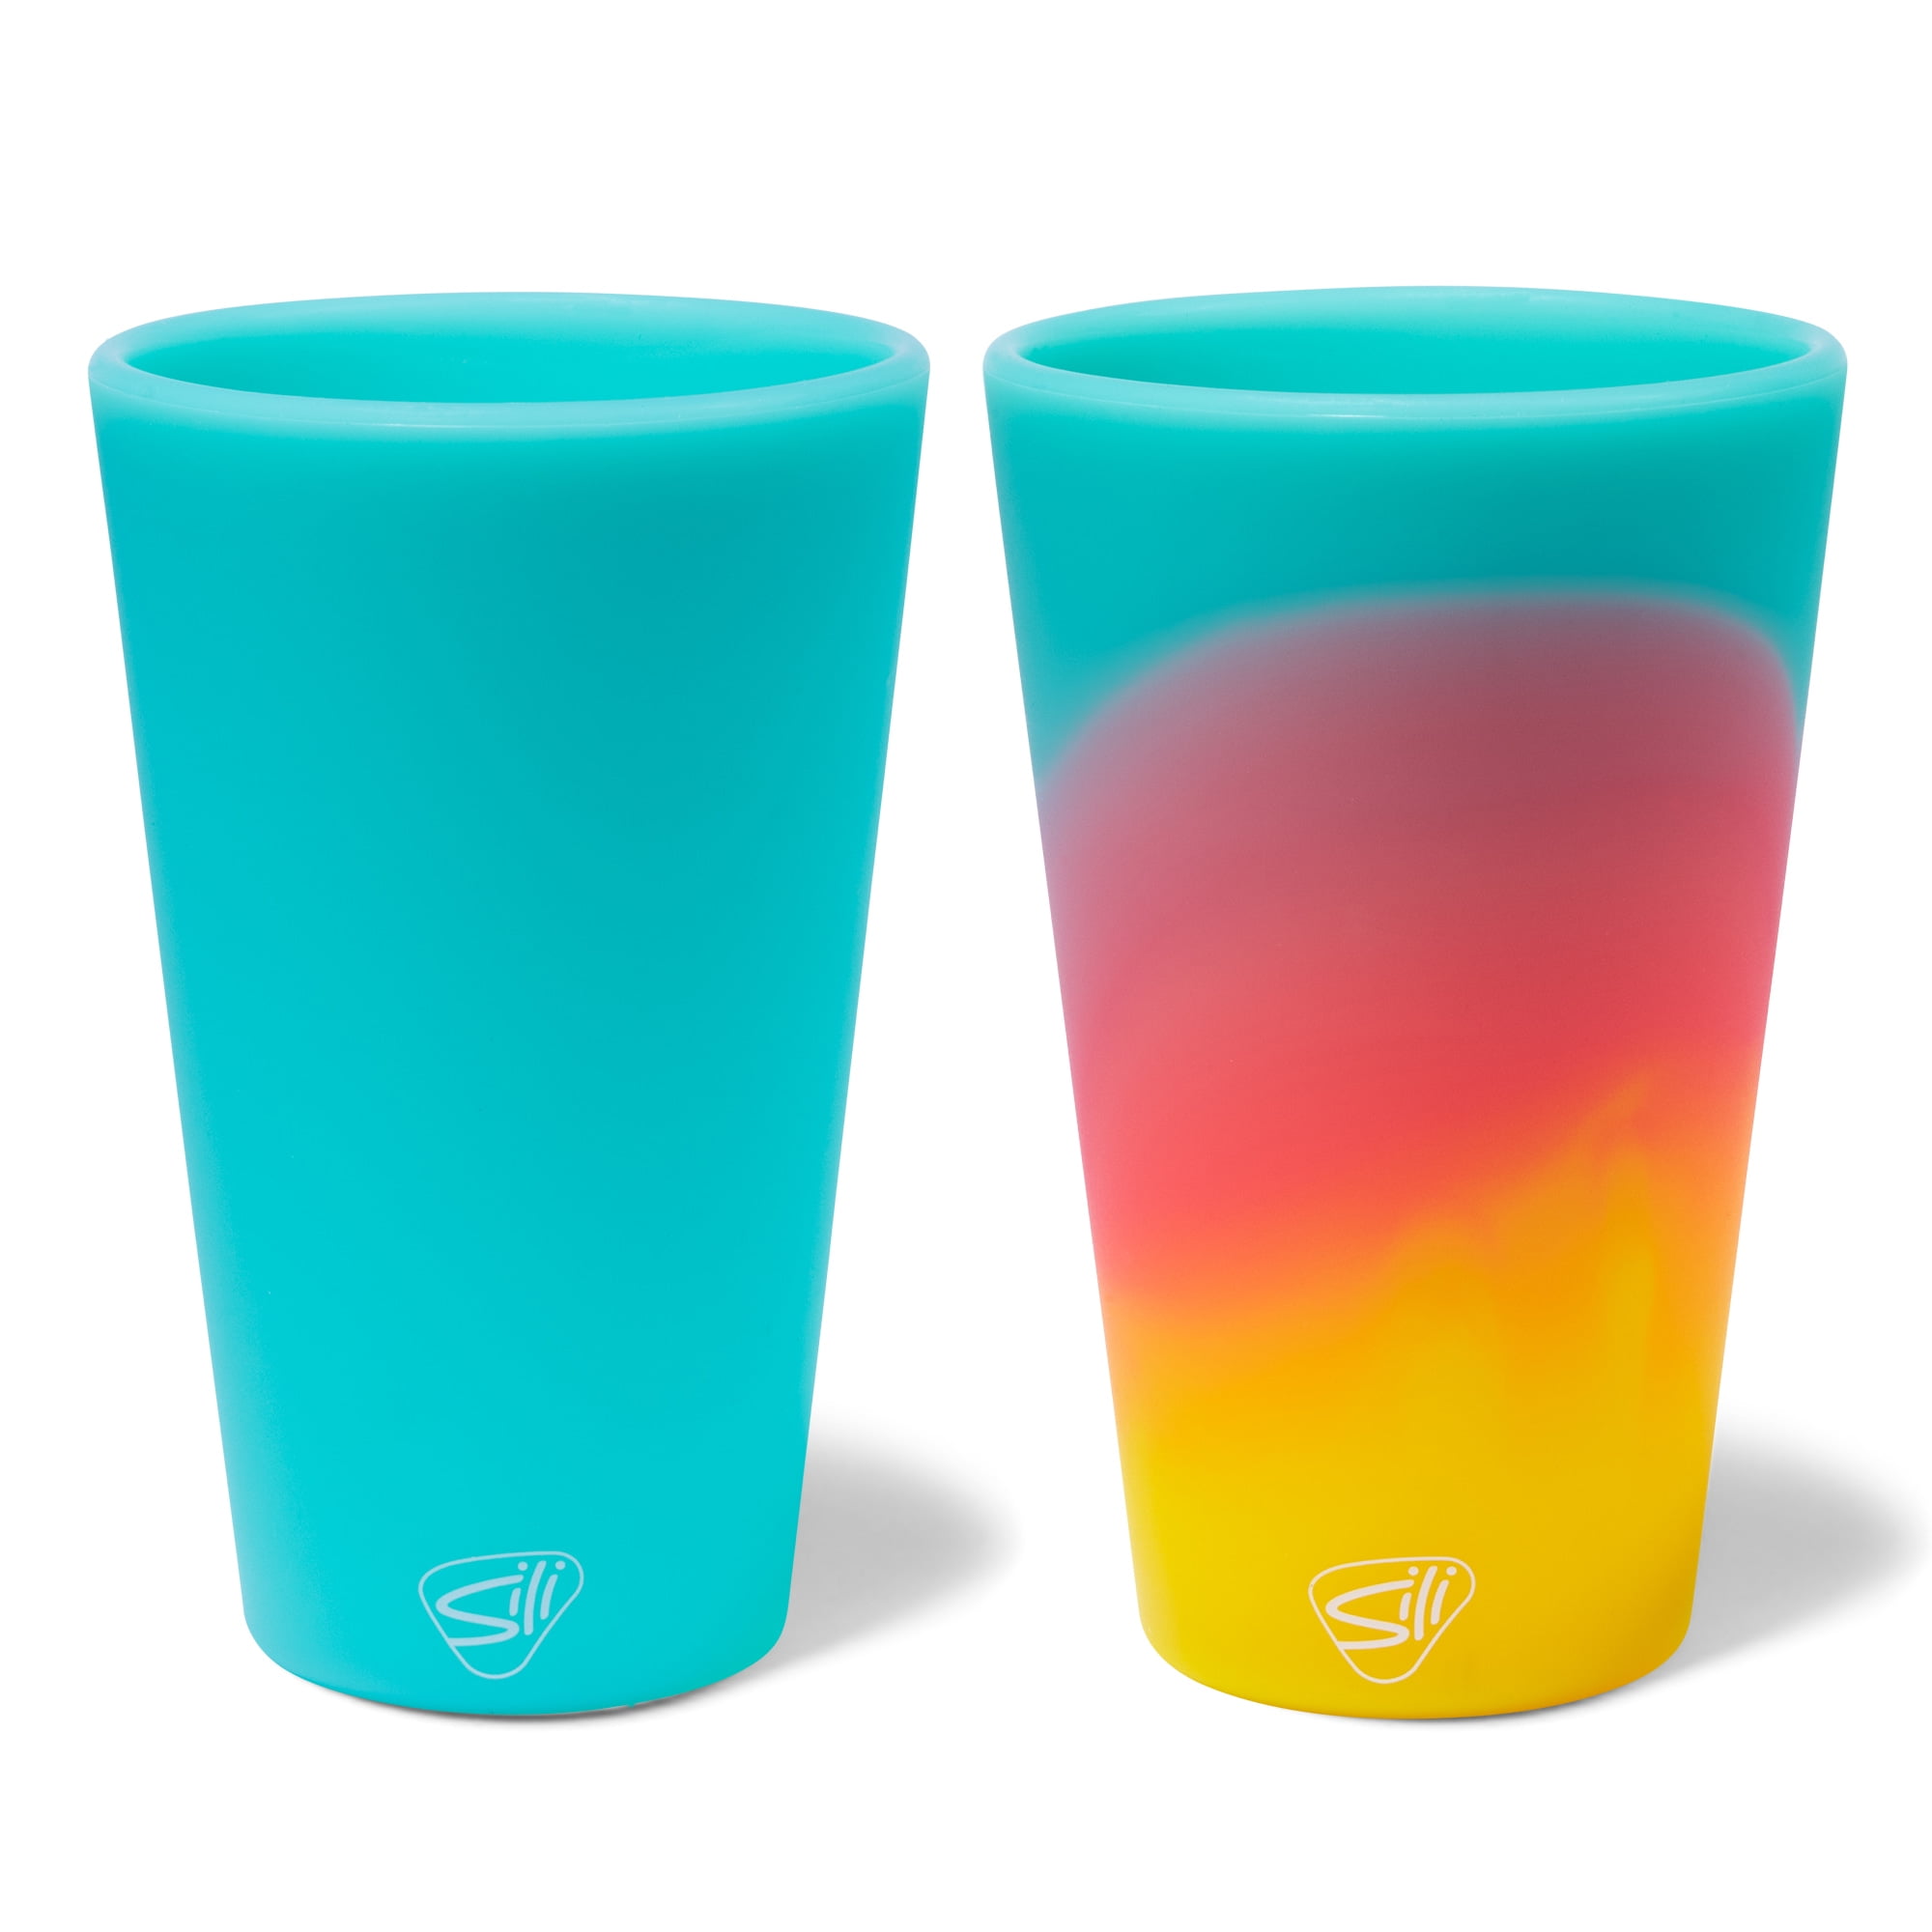 Silipint: Silicone Pint Glasses: 2 Pack Arctic Sky - 16oz Unbreakable Cups, Flexible, Hot/Cold, Reusable, Easy Grip